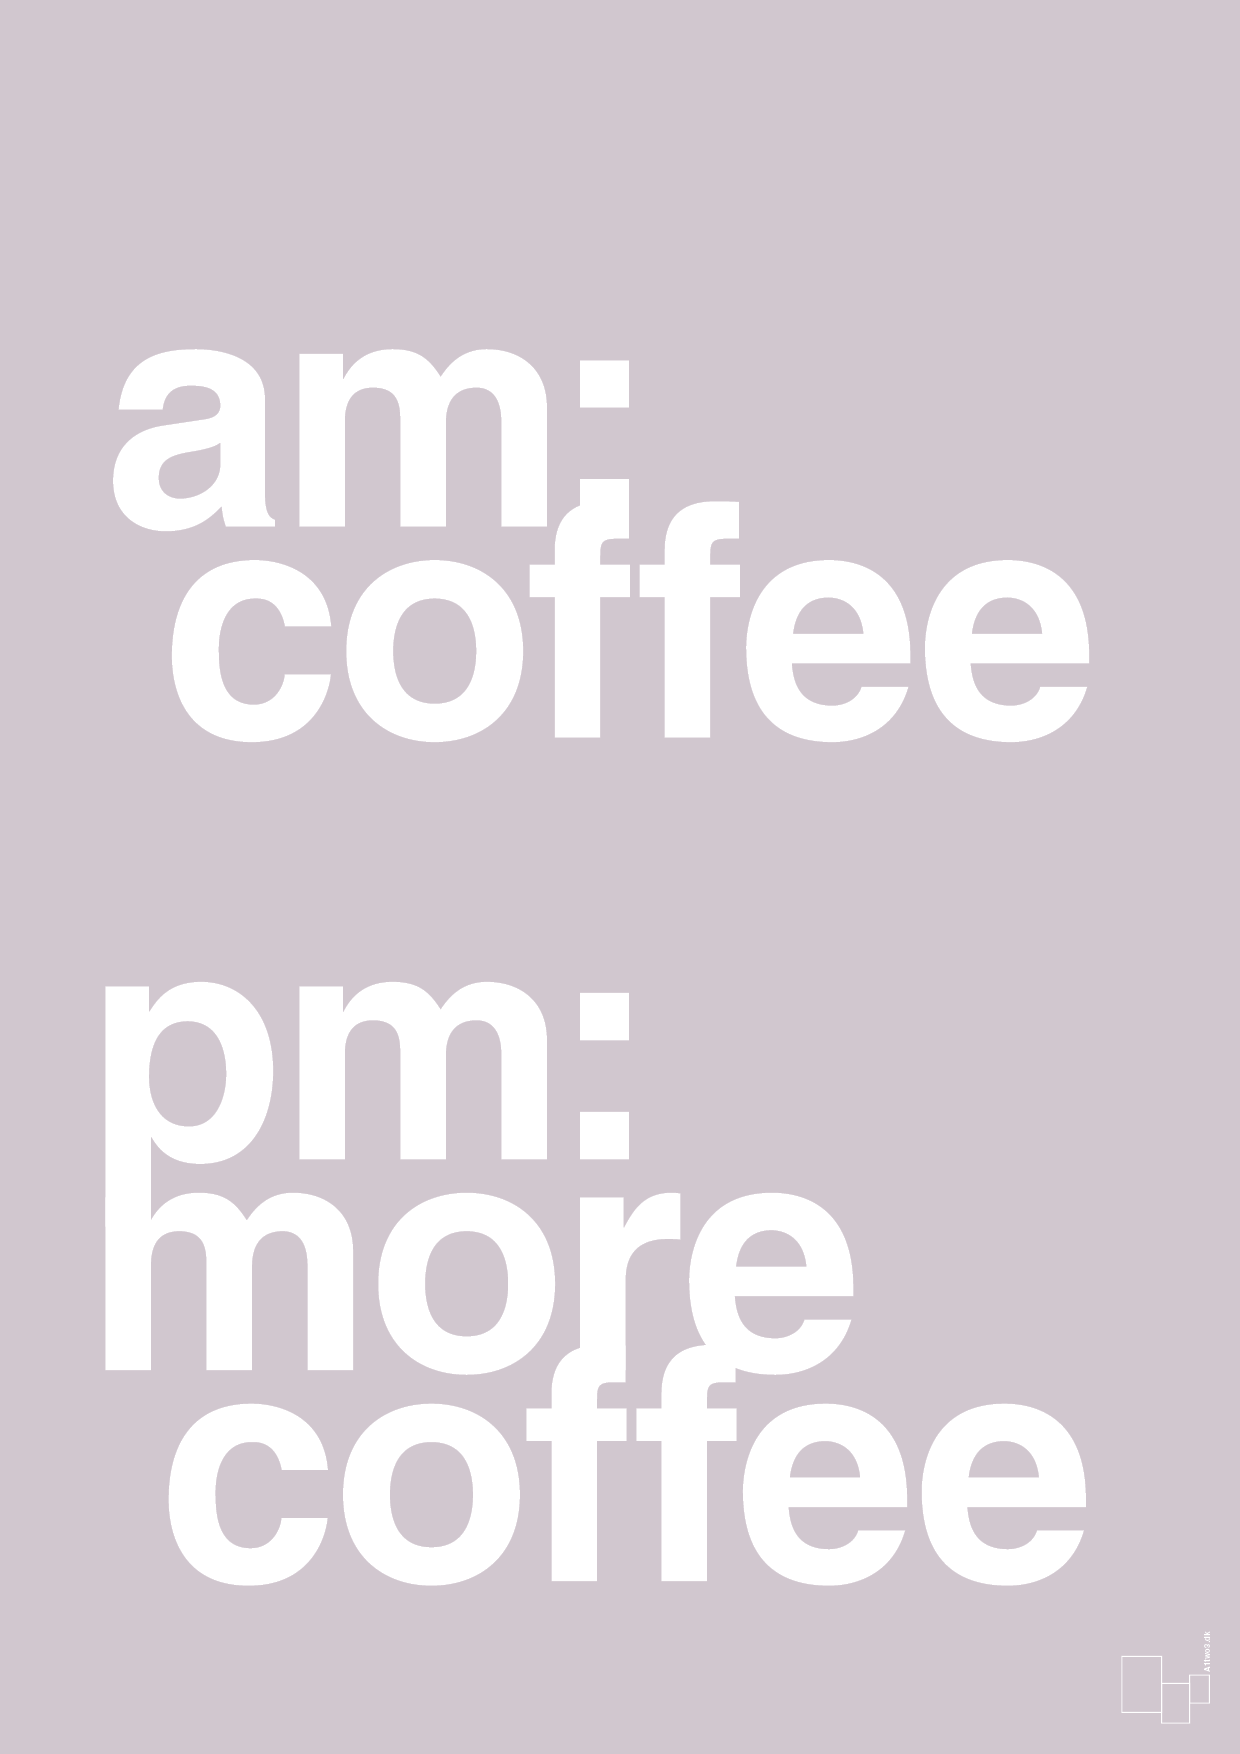 am coffee pm more coffee - Plakat med Ordsprog i Dusty Lilac